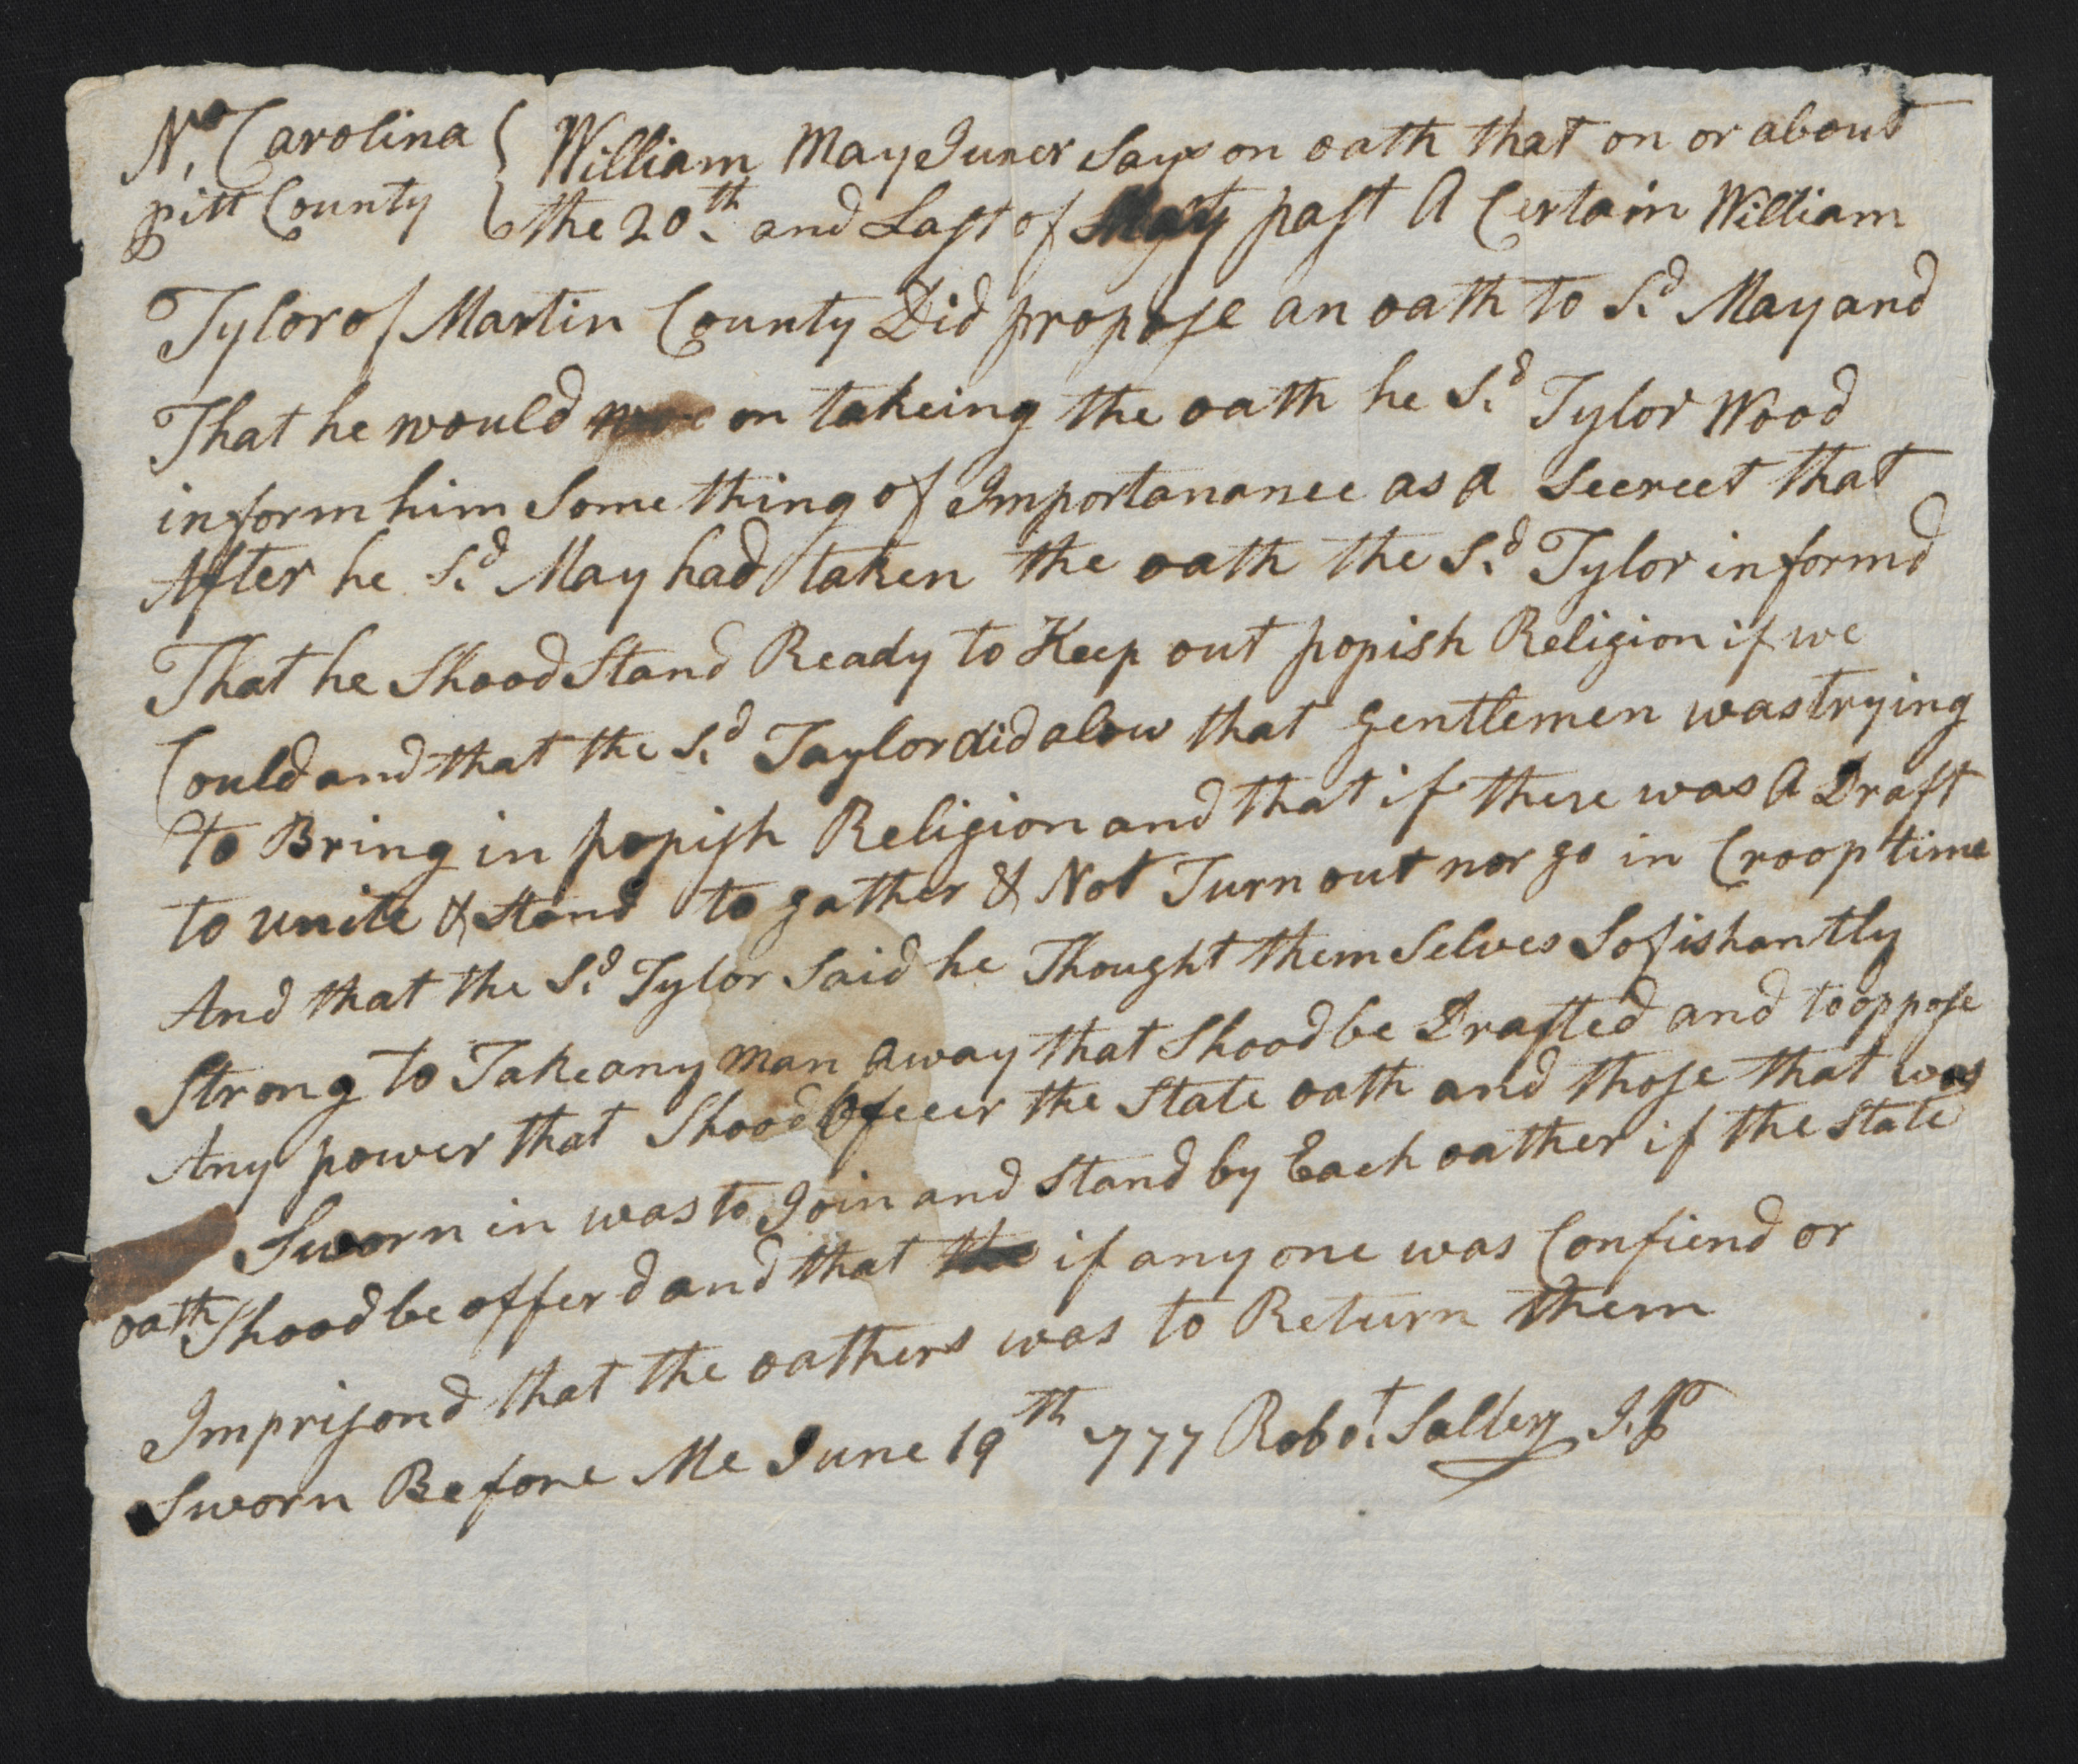 Deposition of William Mayo, 19 June 1777, page 1